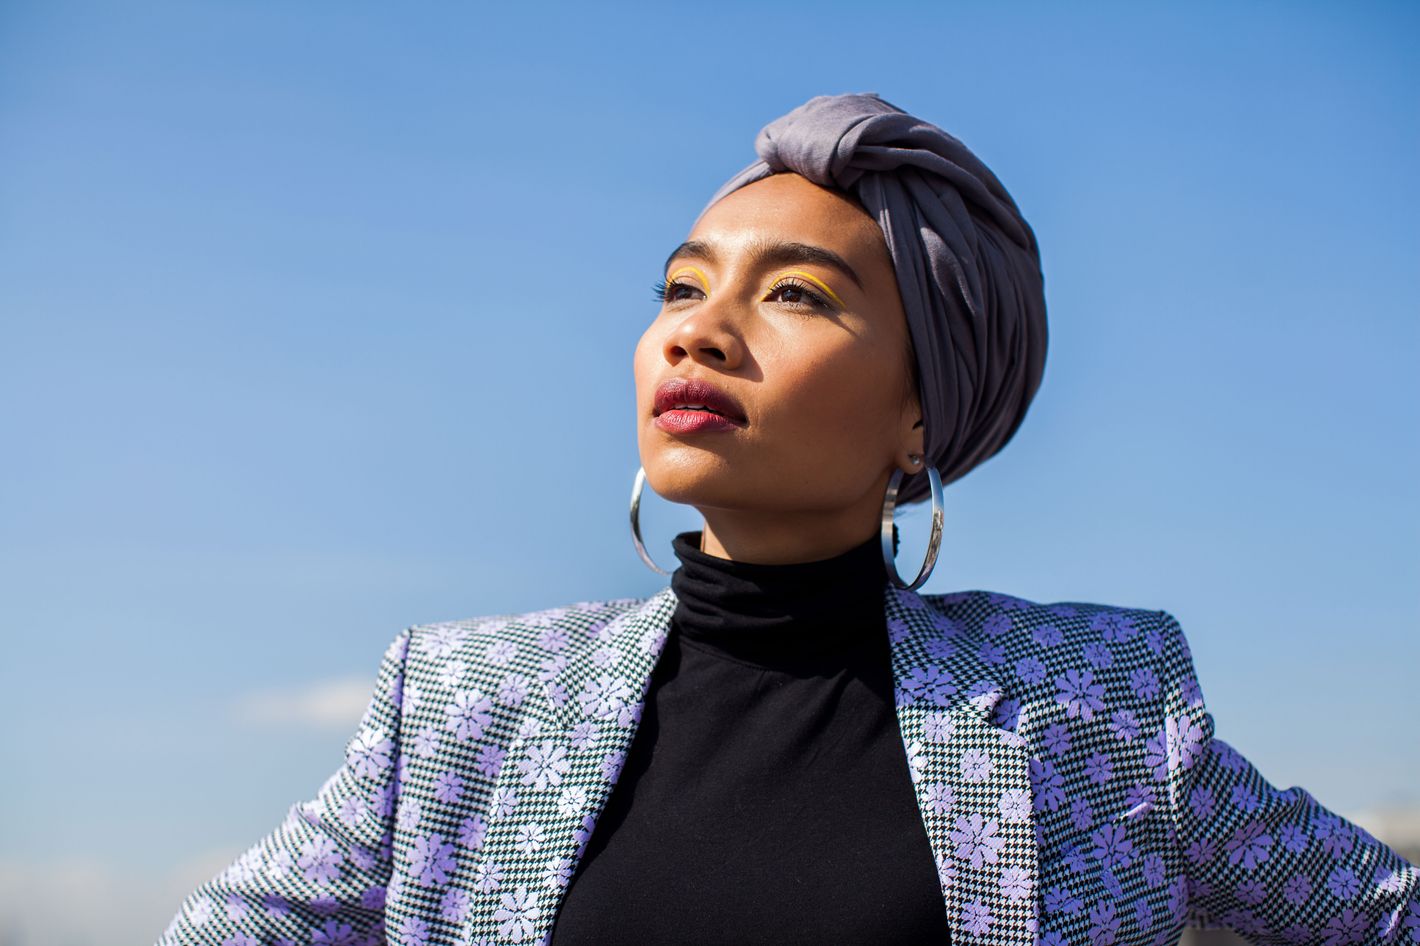 Malaysian Singer Yuna Embraces Role as Advocate for 